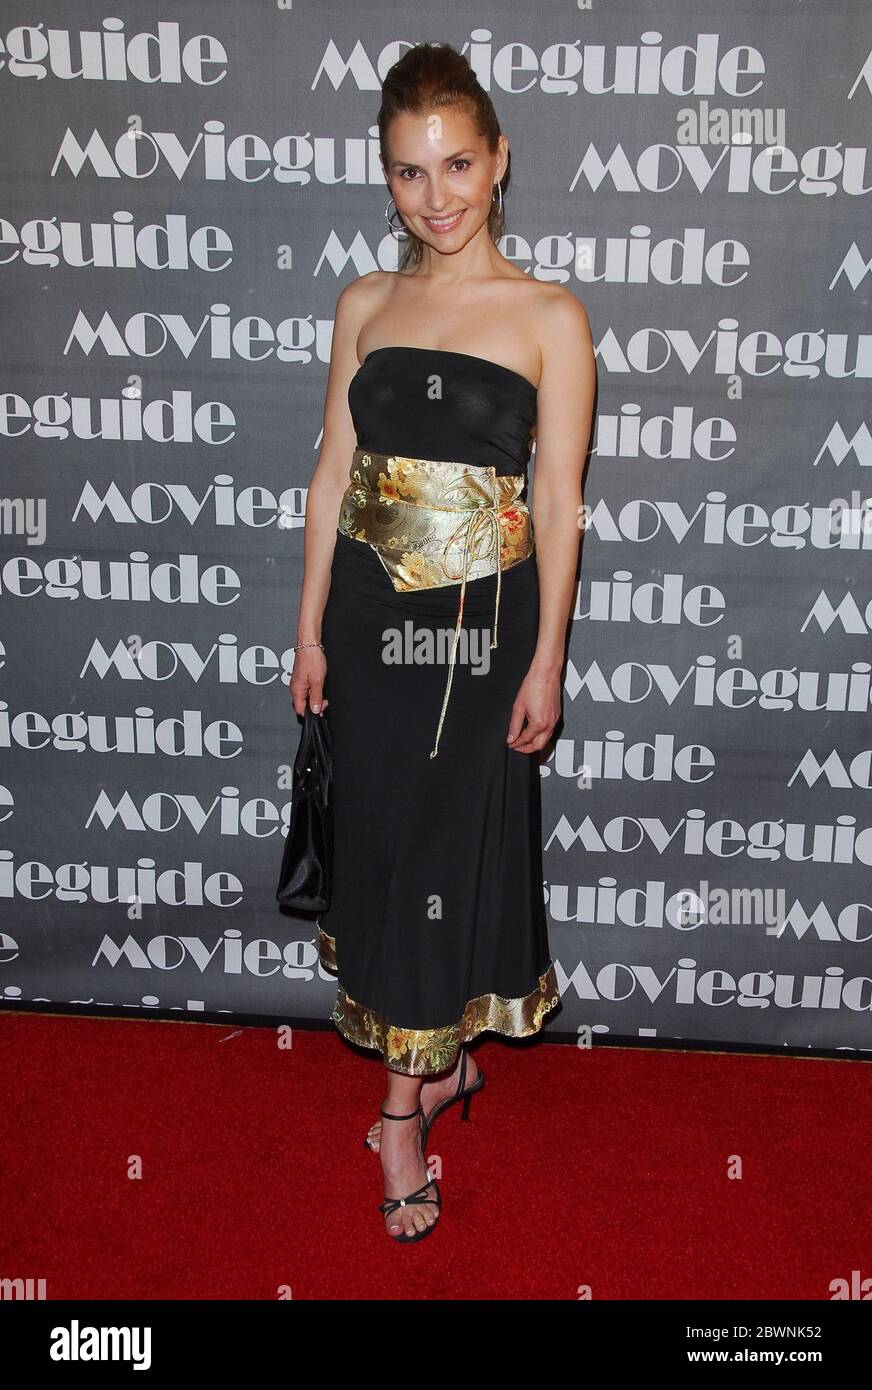 Shani Rigsbee at the 15th Annual Movieguide Awards held at The Beverly Wilshire Hotel in Beverly Hills, CA. The event took place on Tuesday, February 20, 2007.  Photo by: SBM / PictureLux- File Reference # 34006-3156SBMPLX Stock Photo